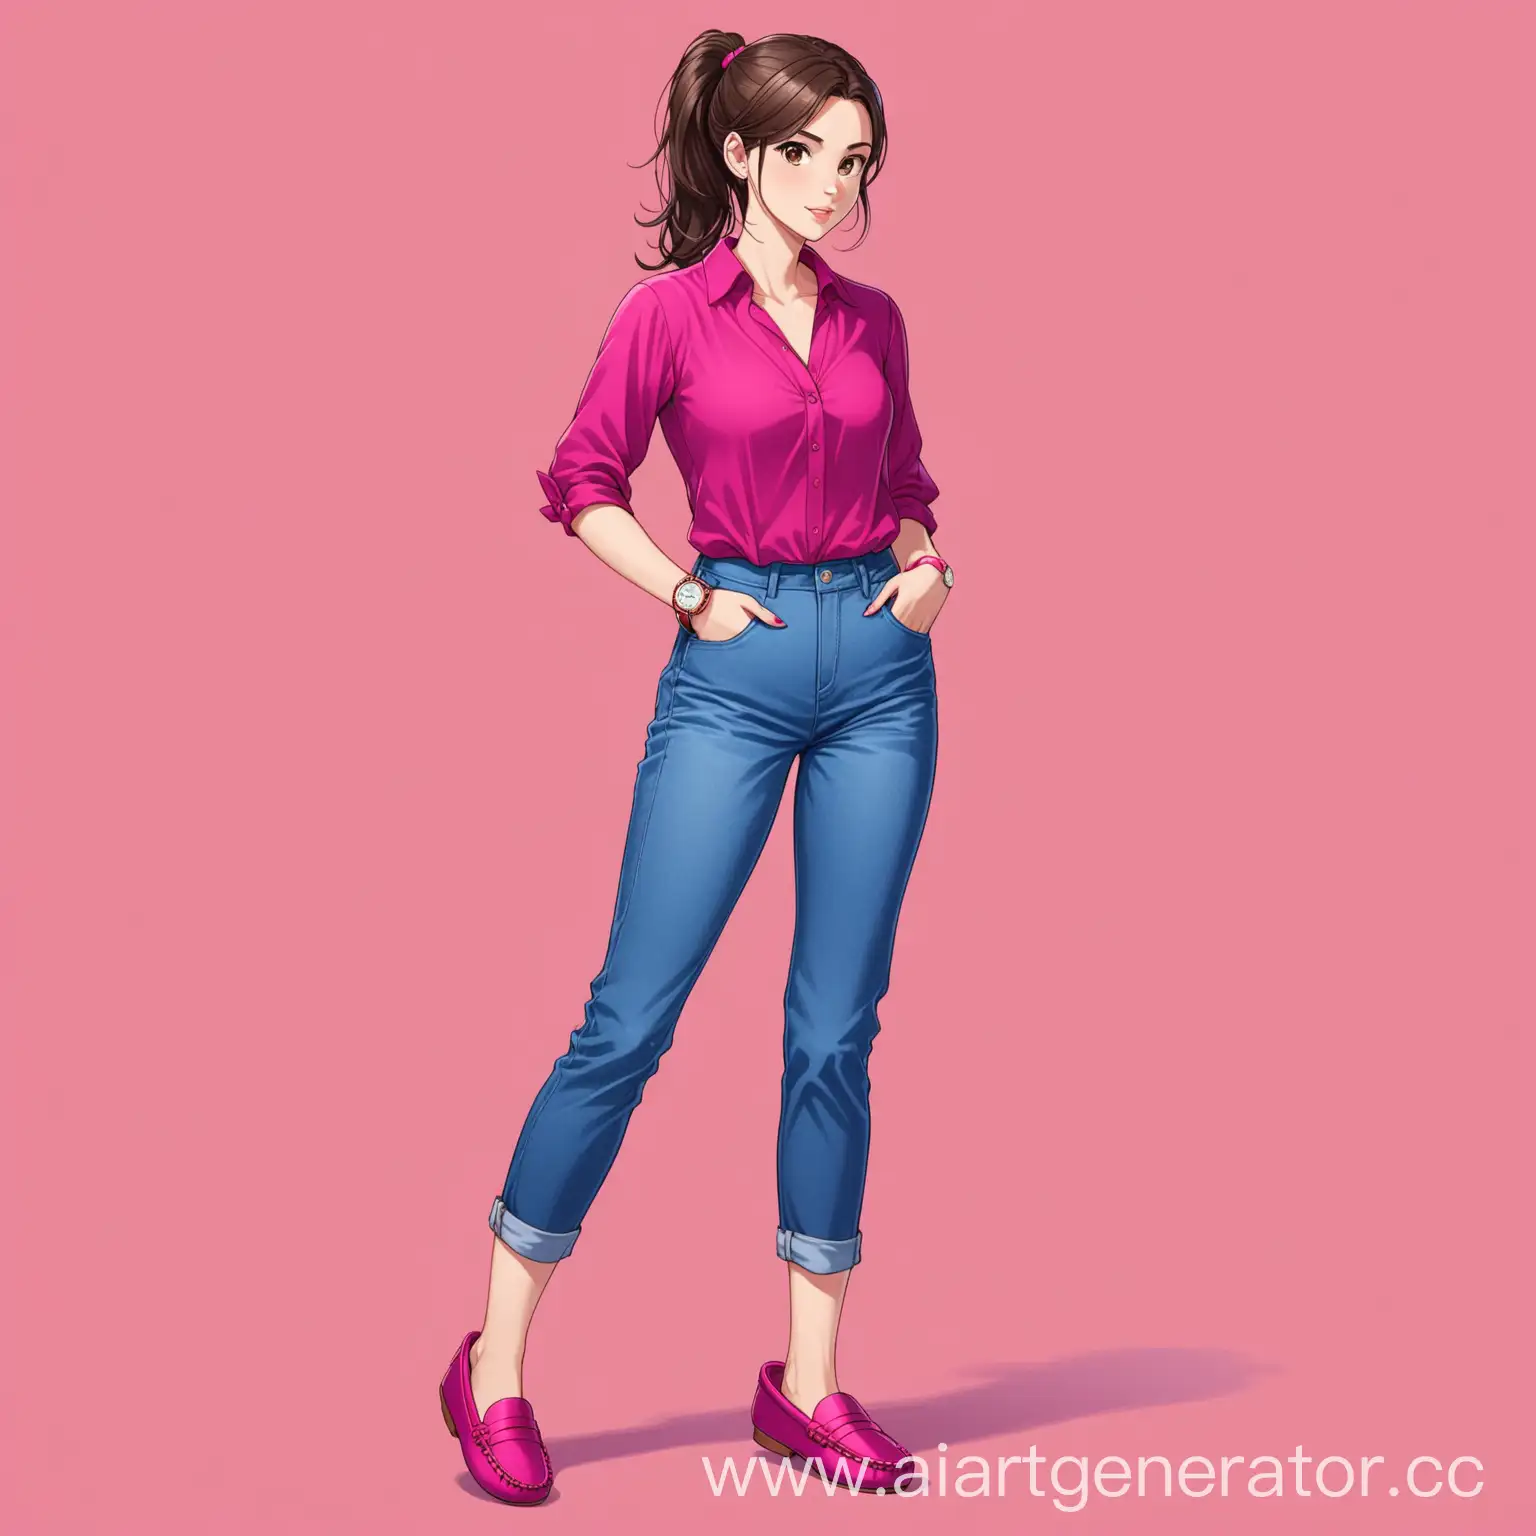 Stylish-HazelEyed-Girl-in-Fuchsia-Blouse-and-Blue-Jeans-with-Red-Moccasins-and-Watch